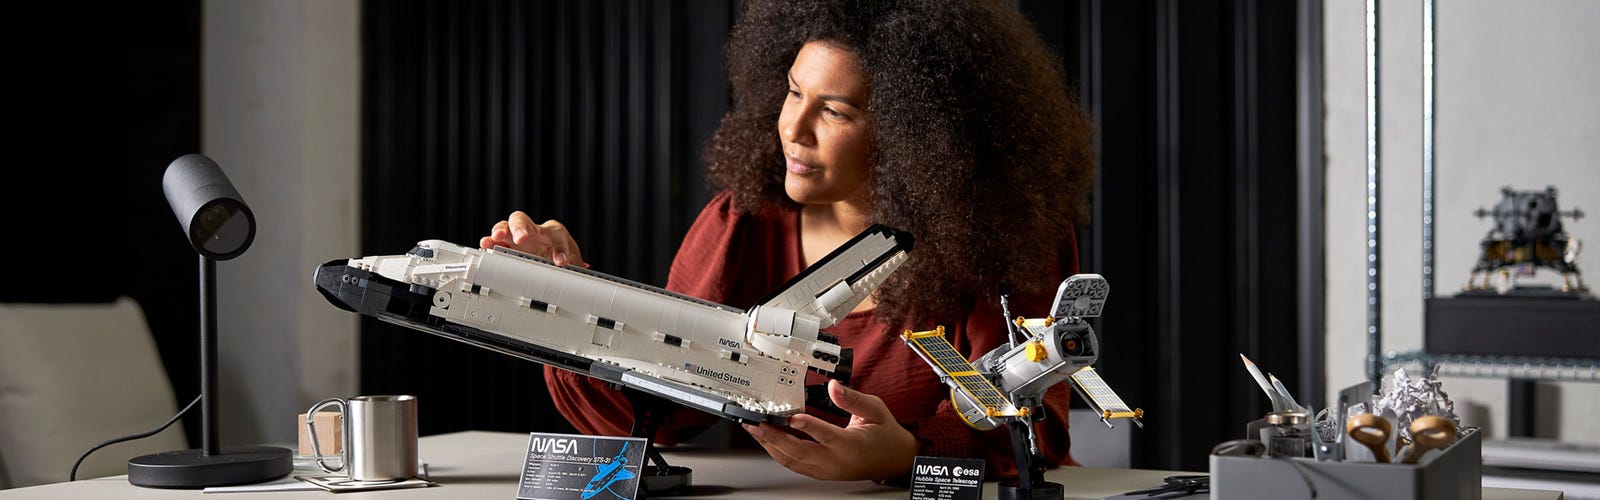 Lego launches epic 2,354-piece NASA Space Shuttle Discovery set - CNET